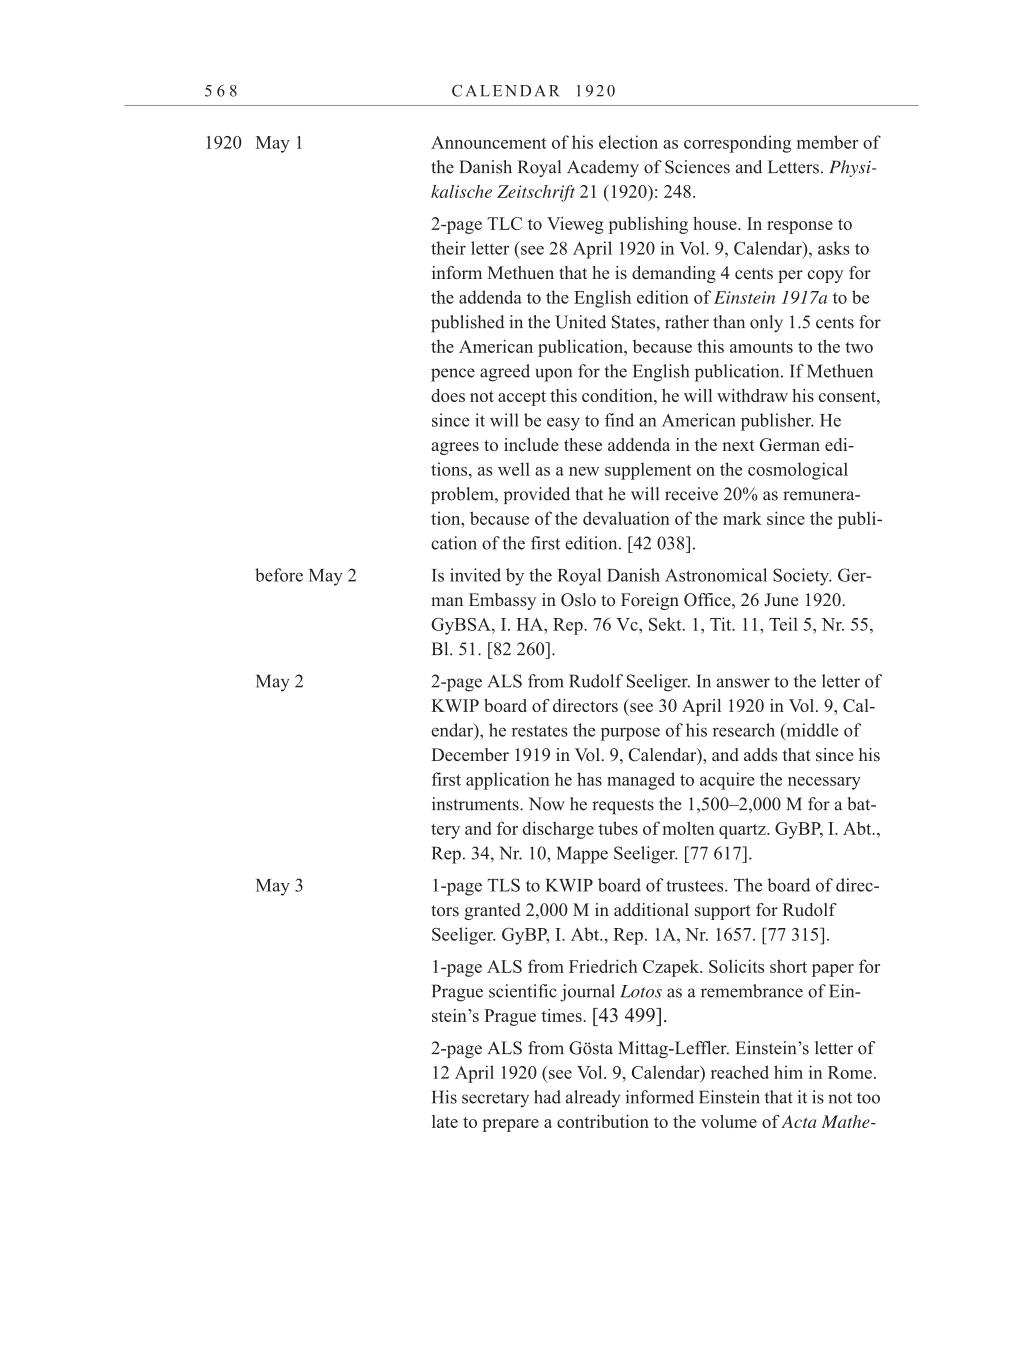 Volume 10: The Berlin Years: Correspondence May-December 1920 / Supplementary Correspondence 1909-1920 page 568